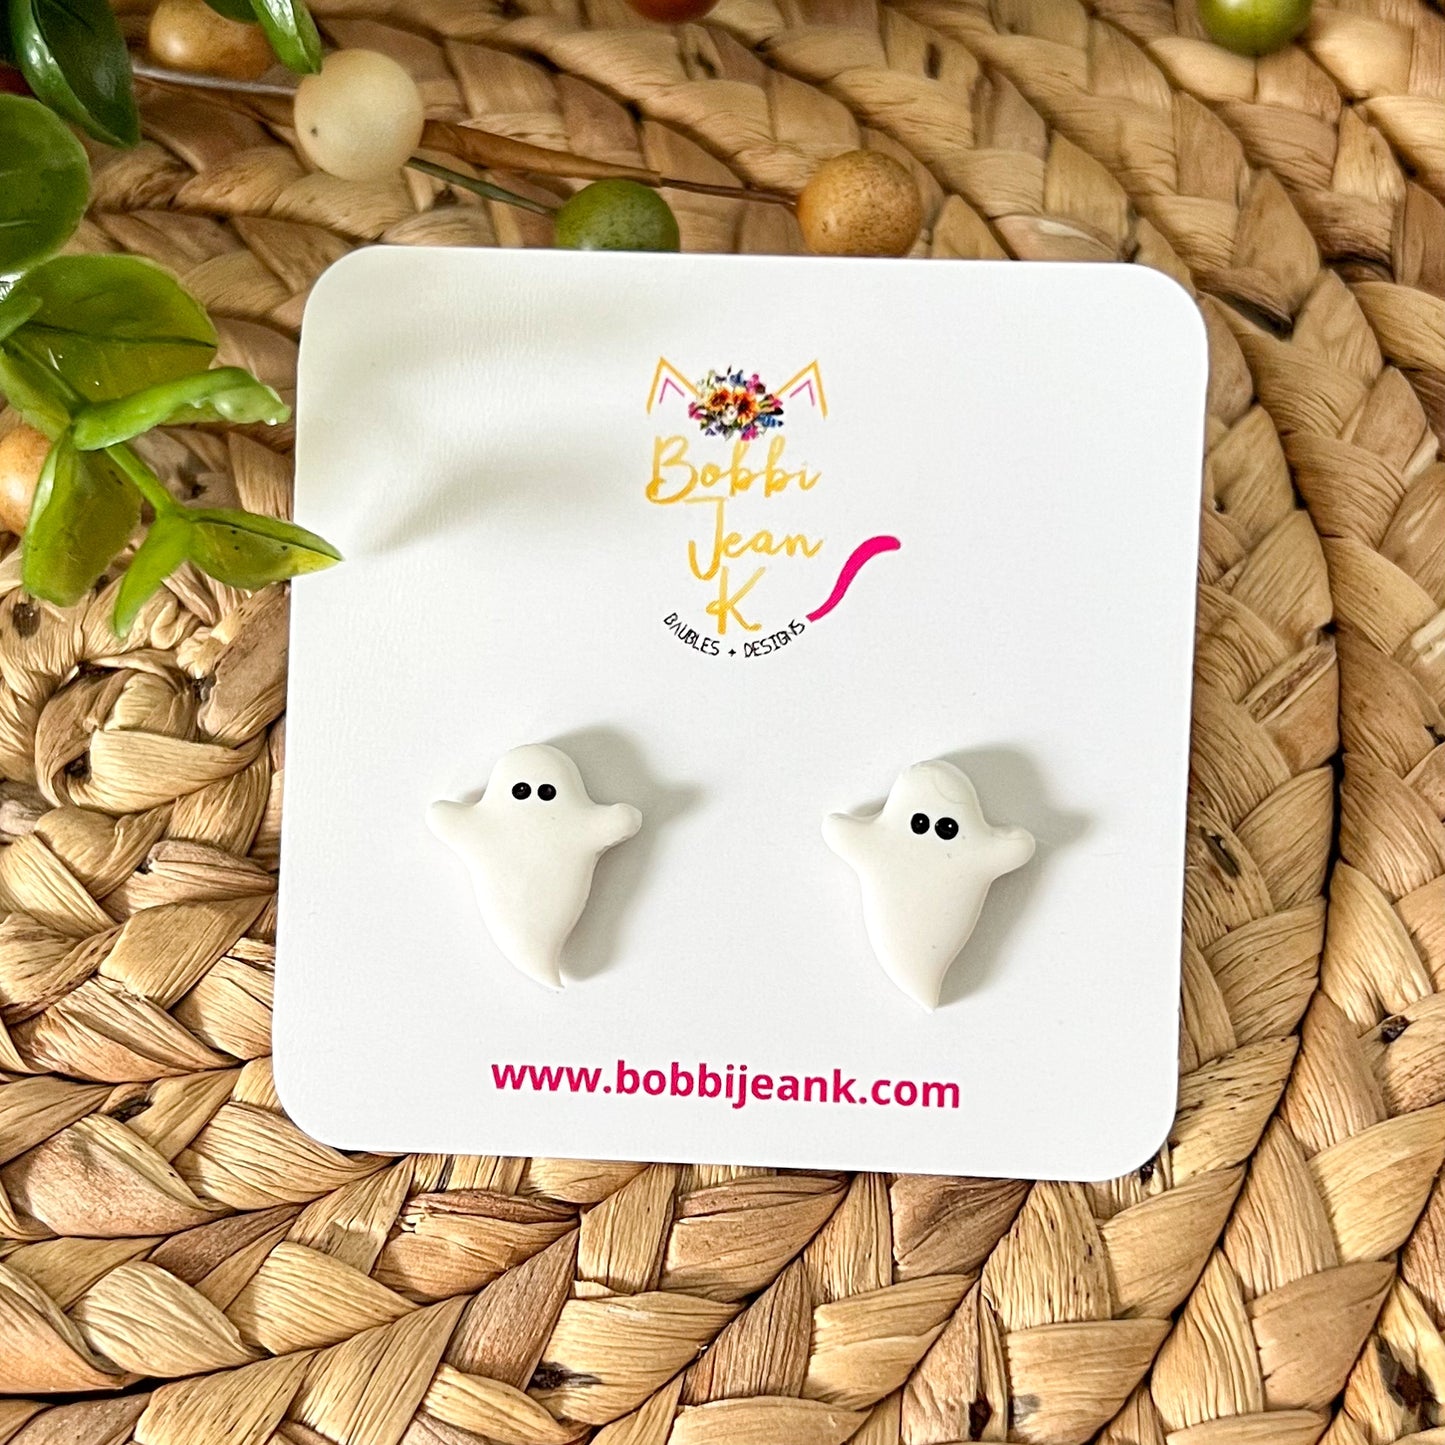 SALE: Ghost Clay Studs: Choose From 2 Sizes